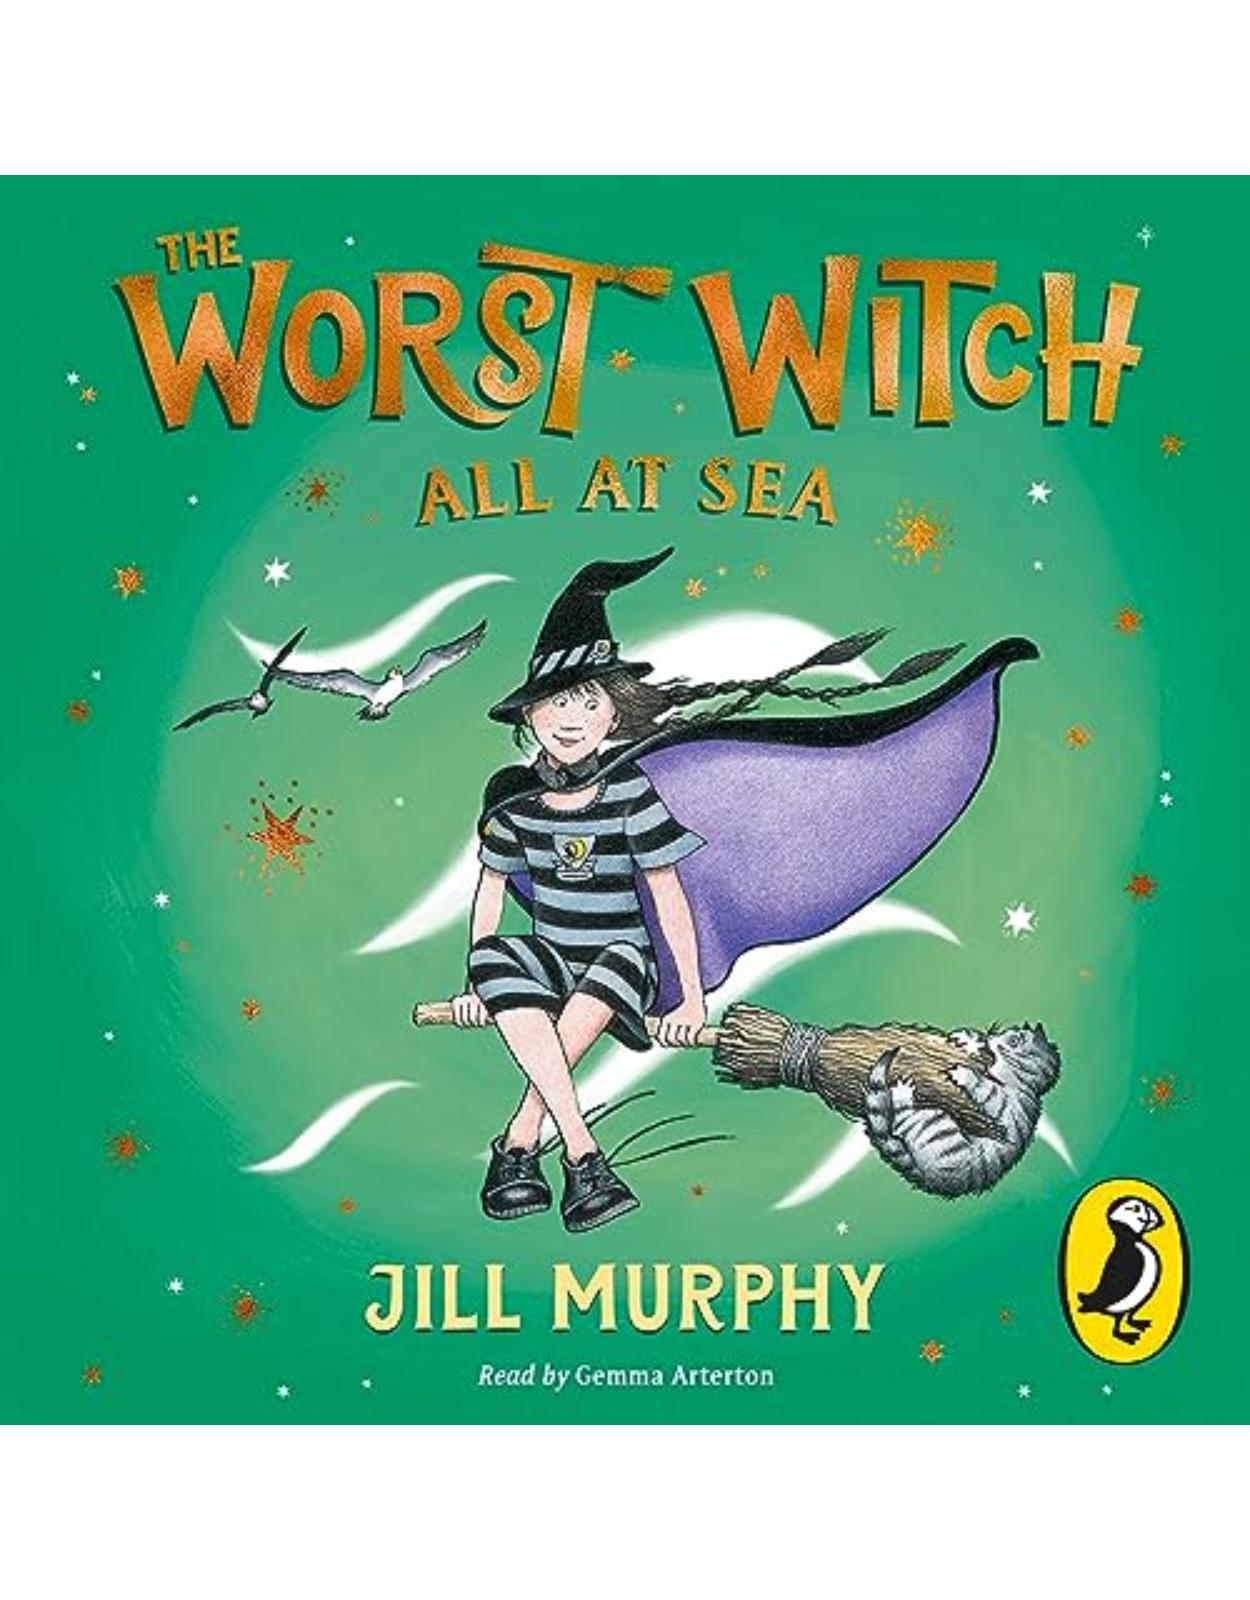 The Worst Witch All at Sea: The Worst Witch